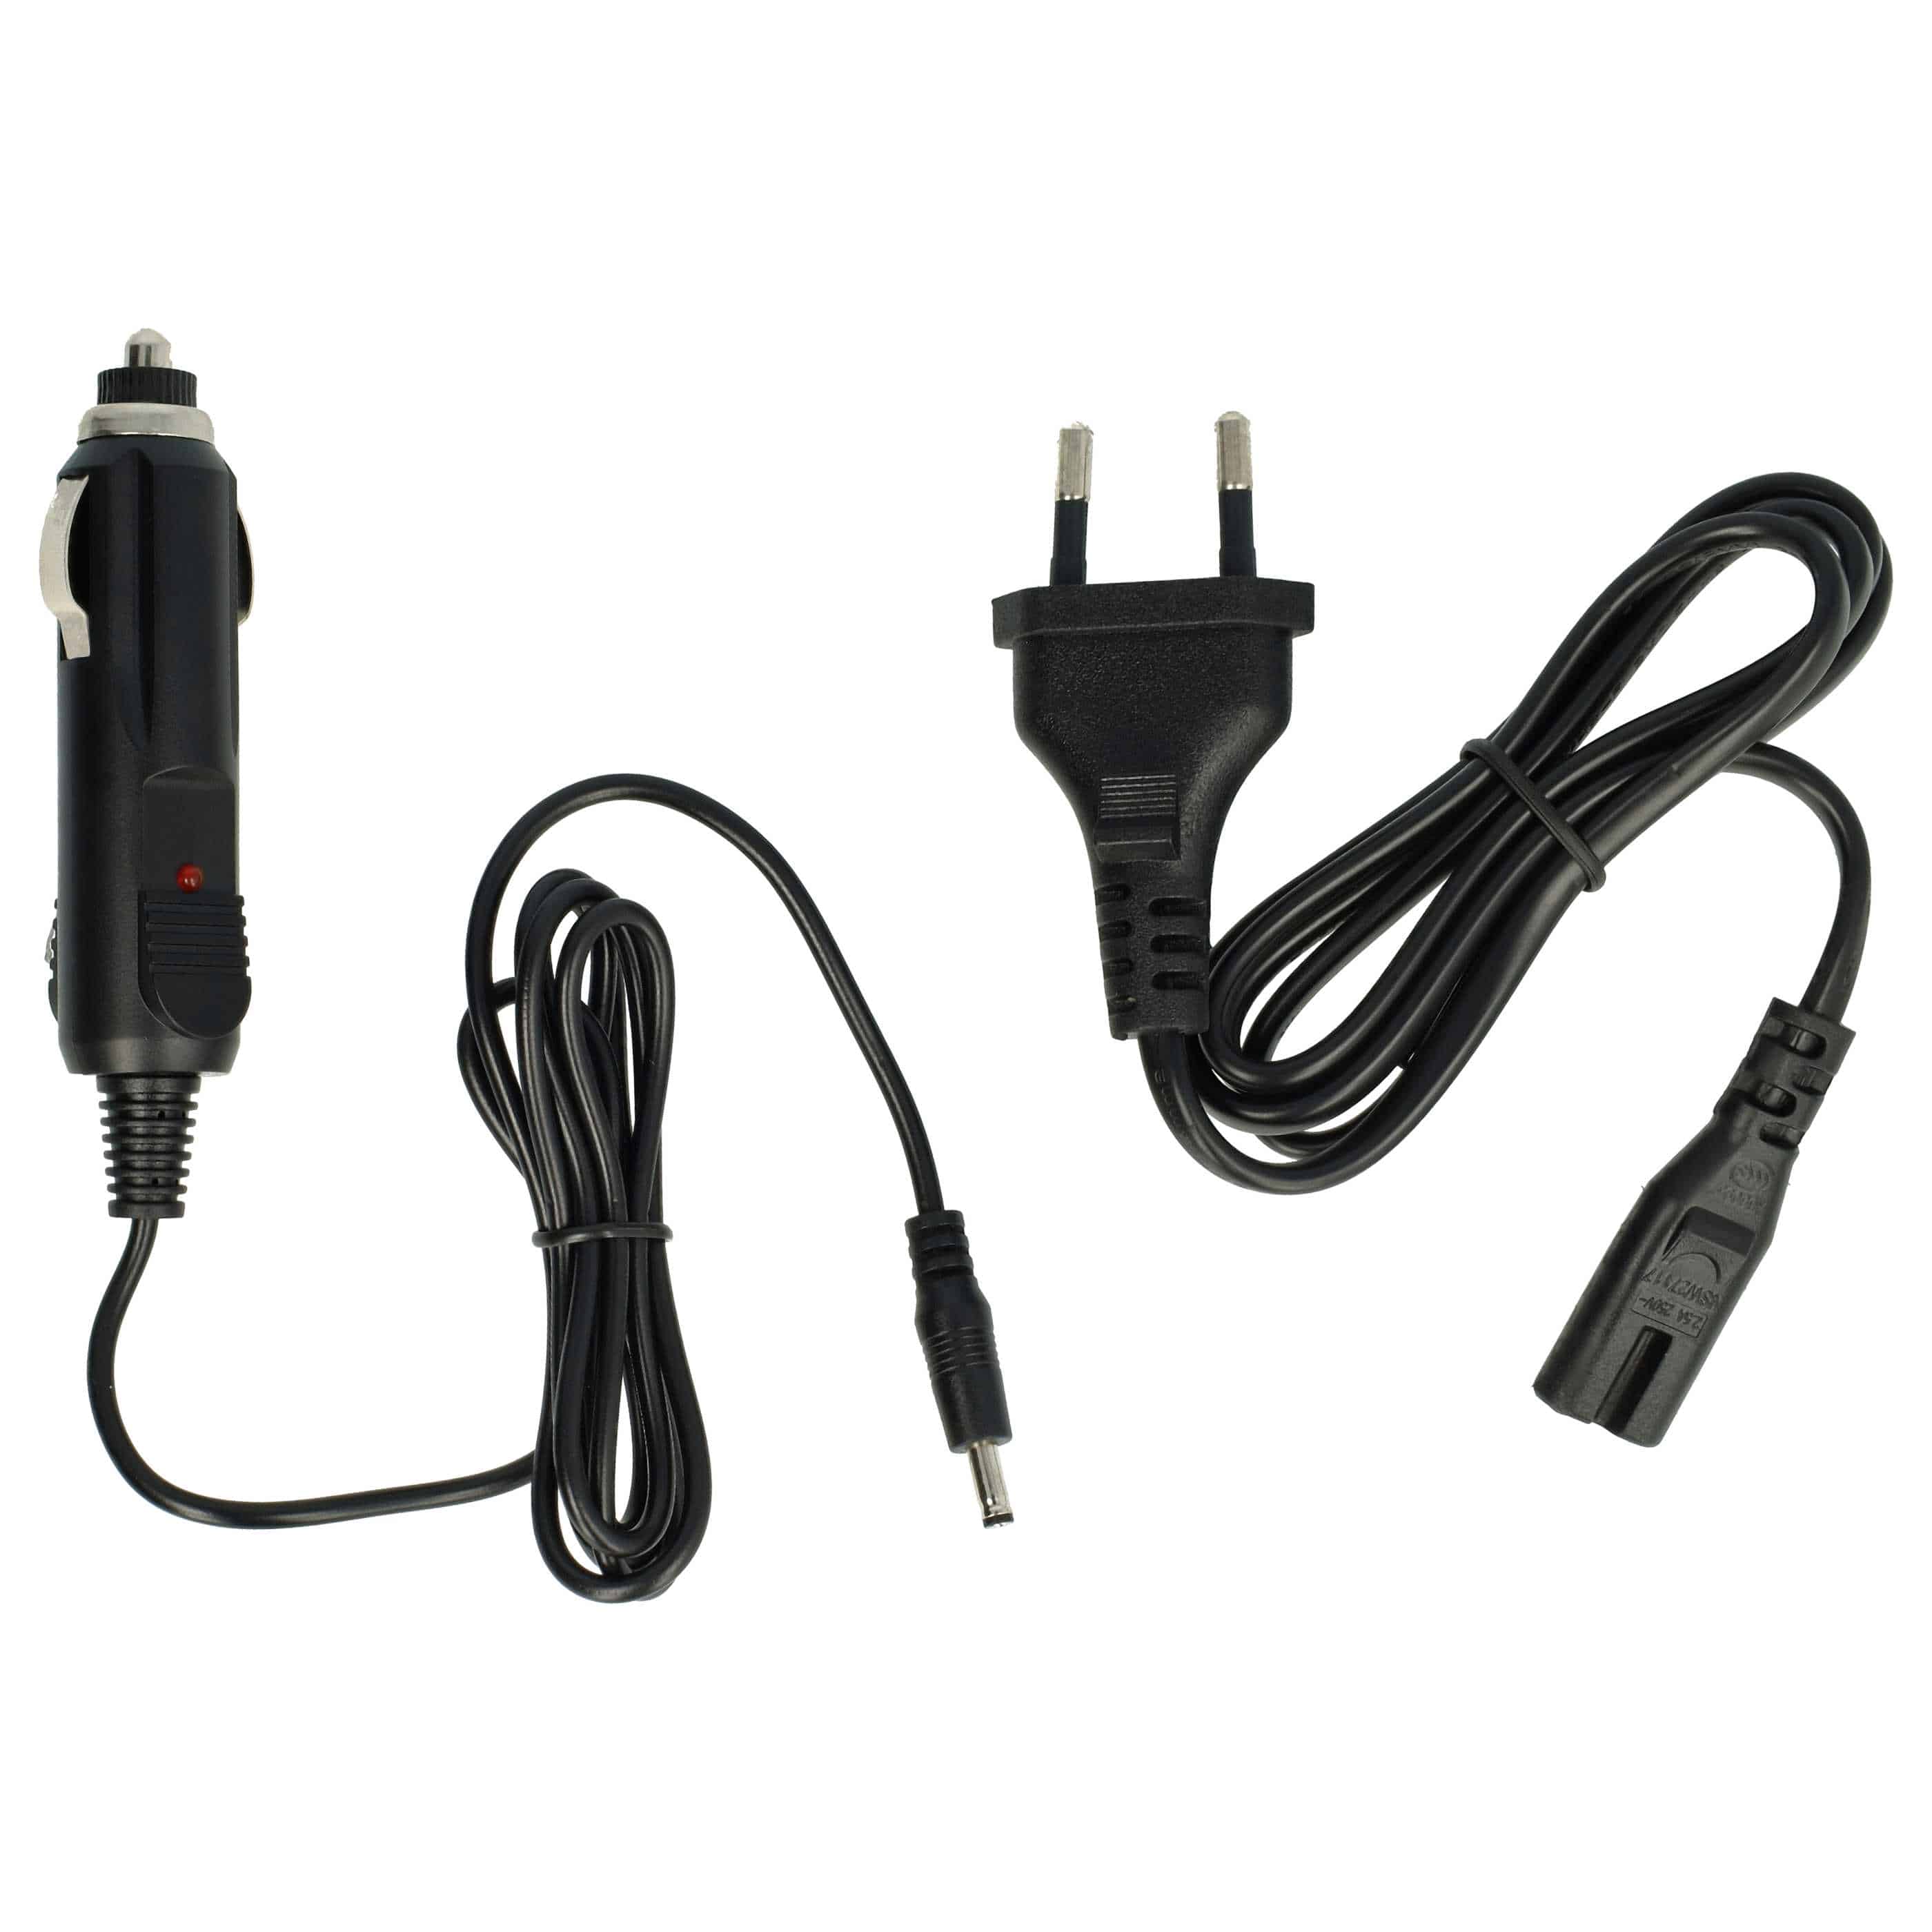 Battery Charger suitable for Fujifilm Digital Camera - 0.6 A, 4.2 V